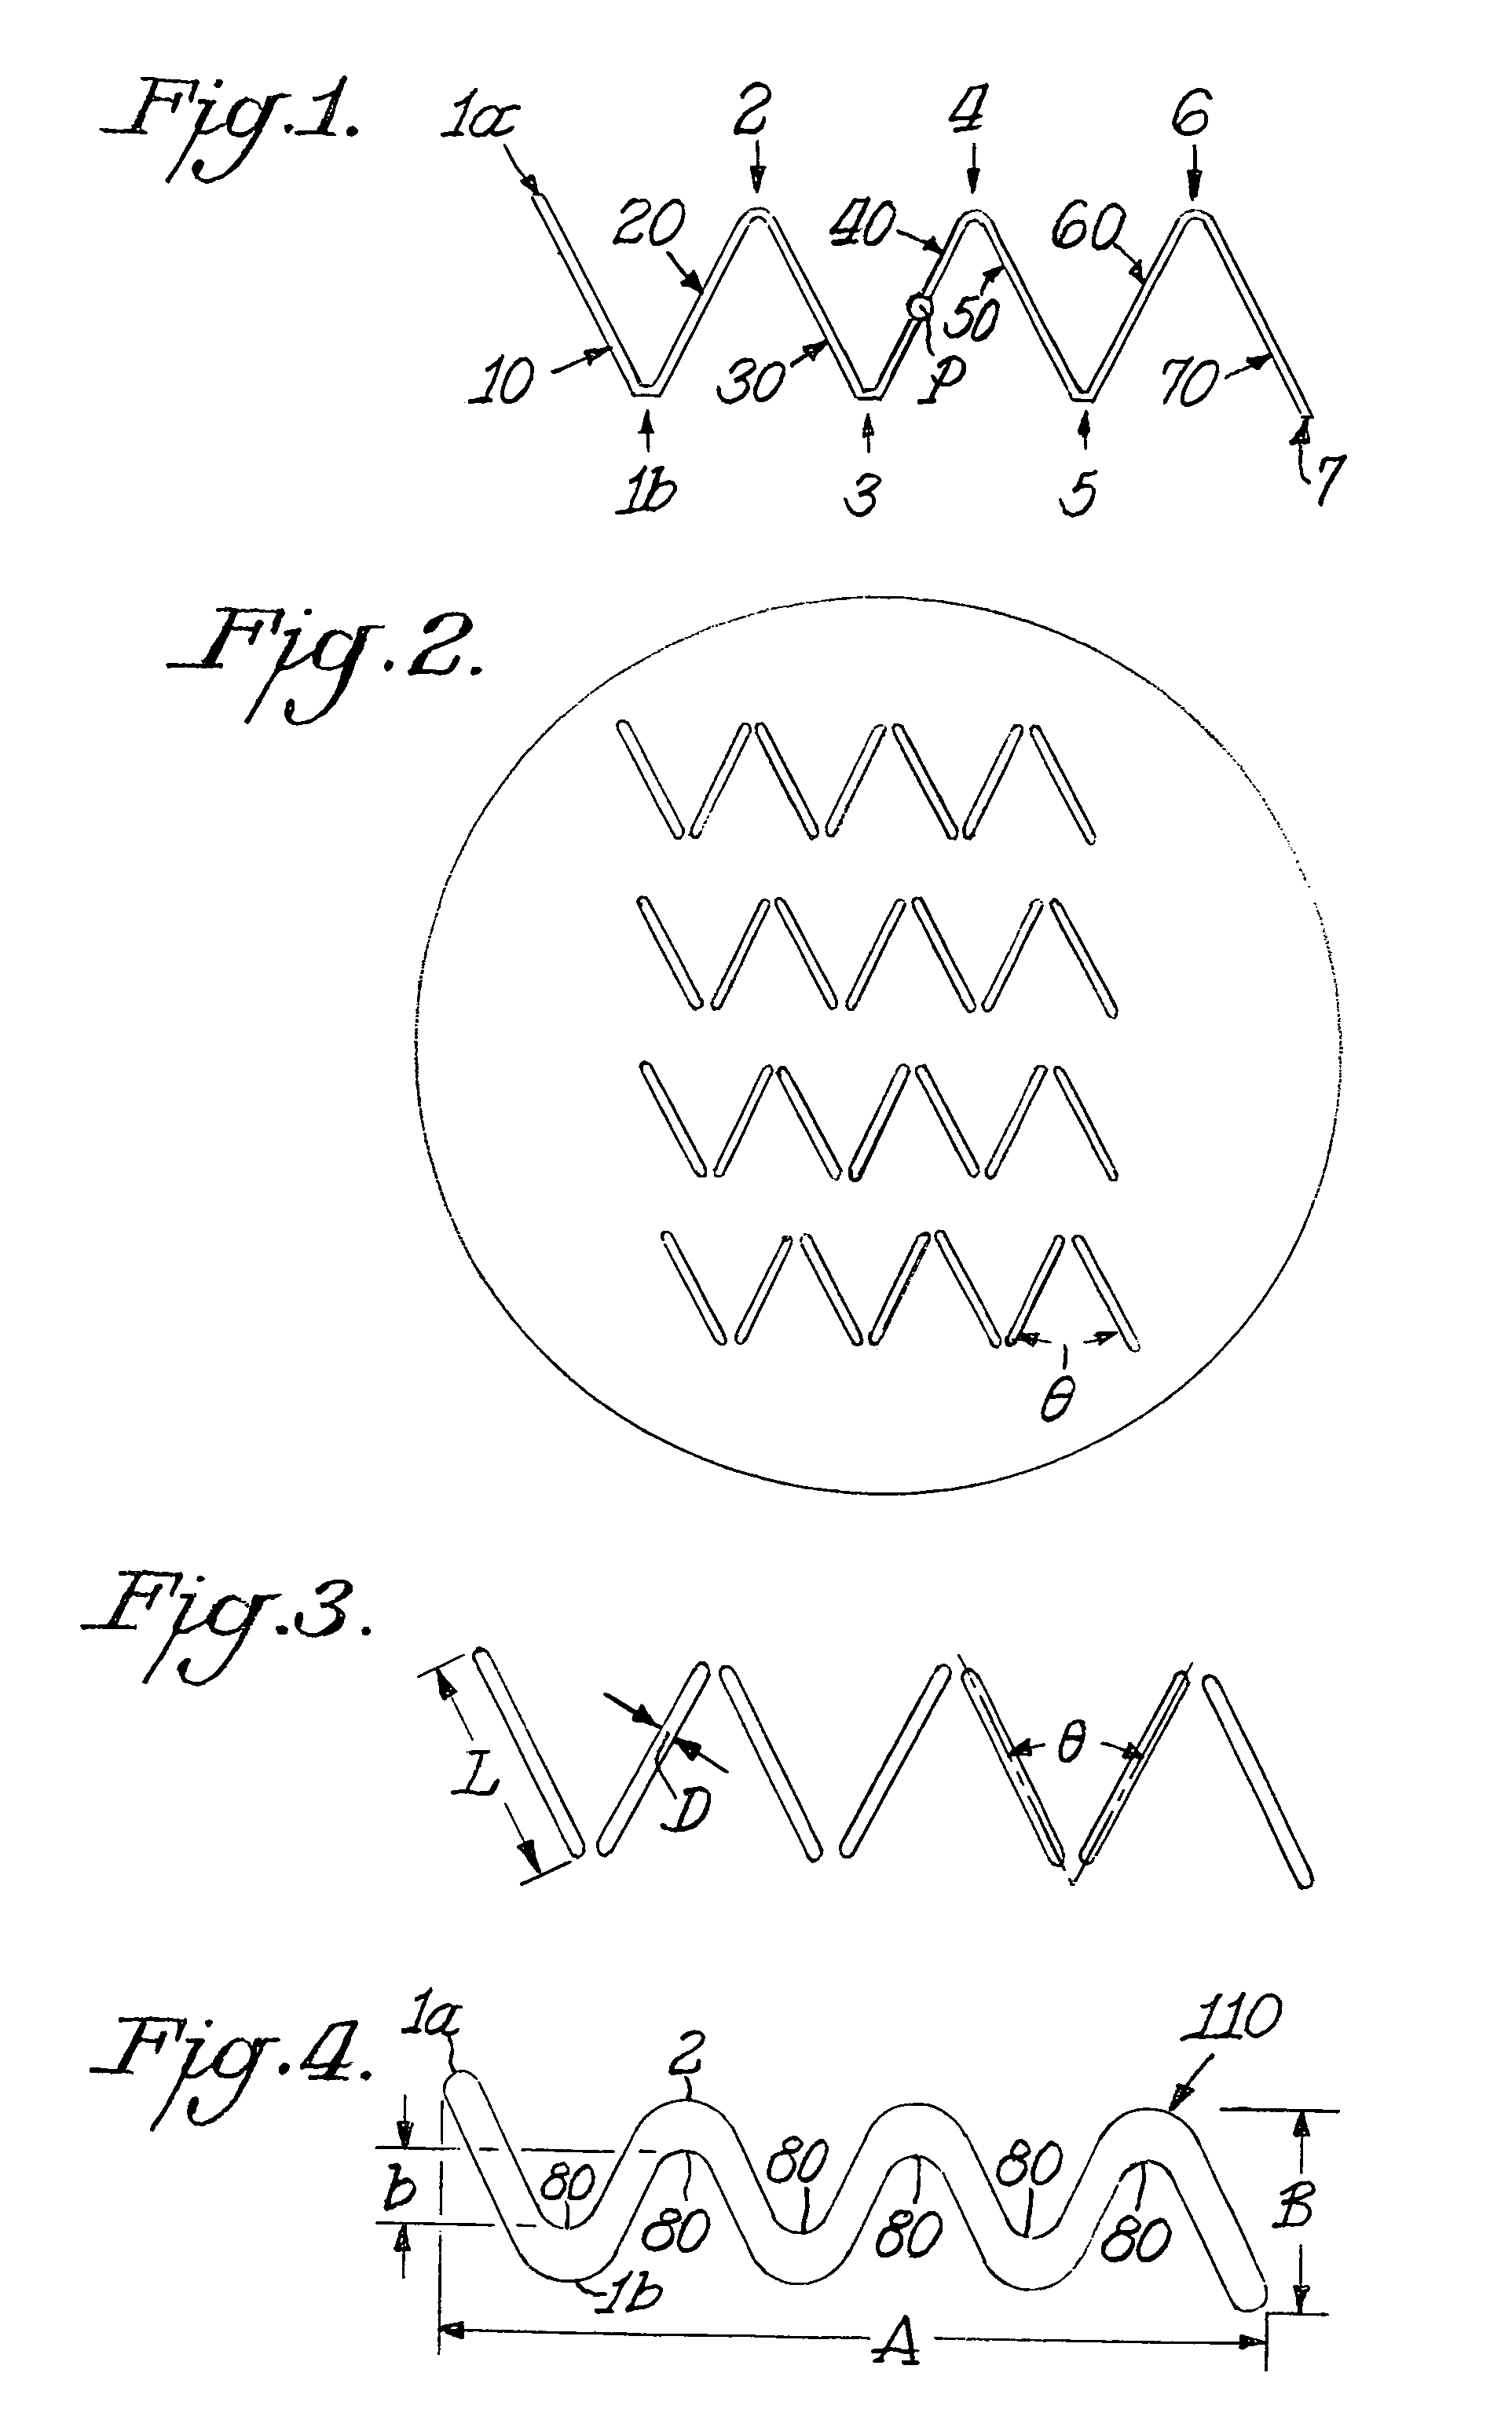 Fabric including polymer filaments having profiled cross-section